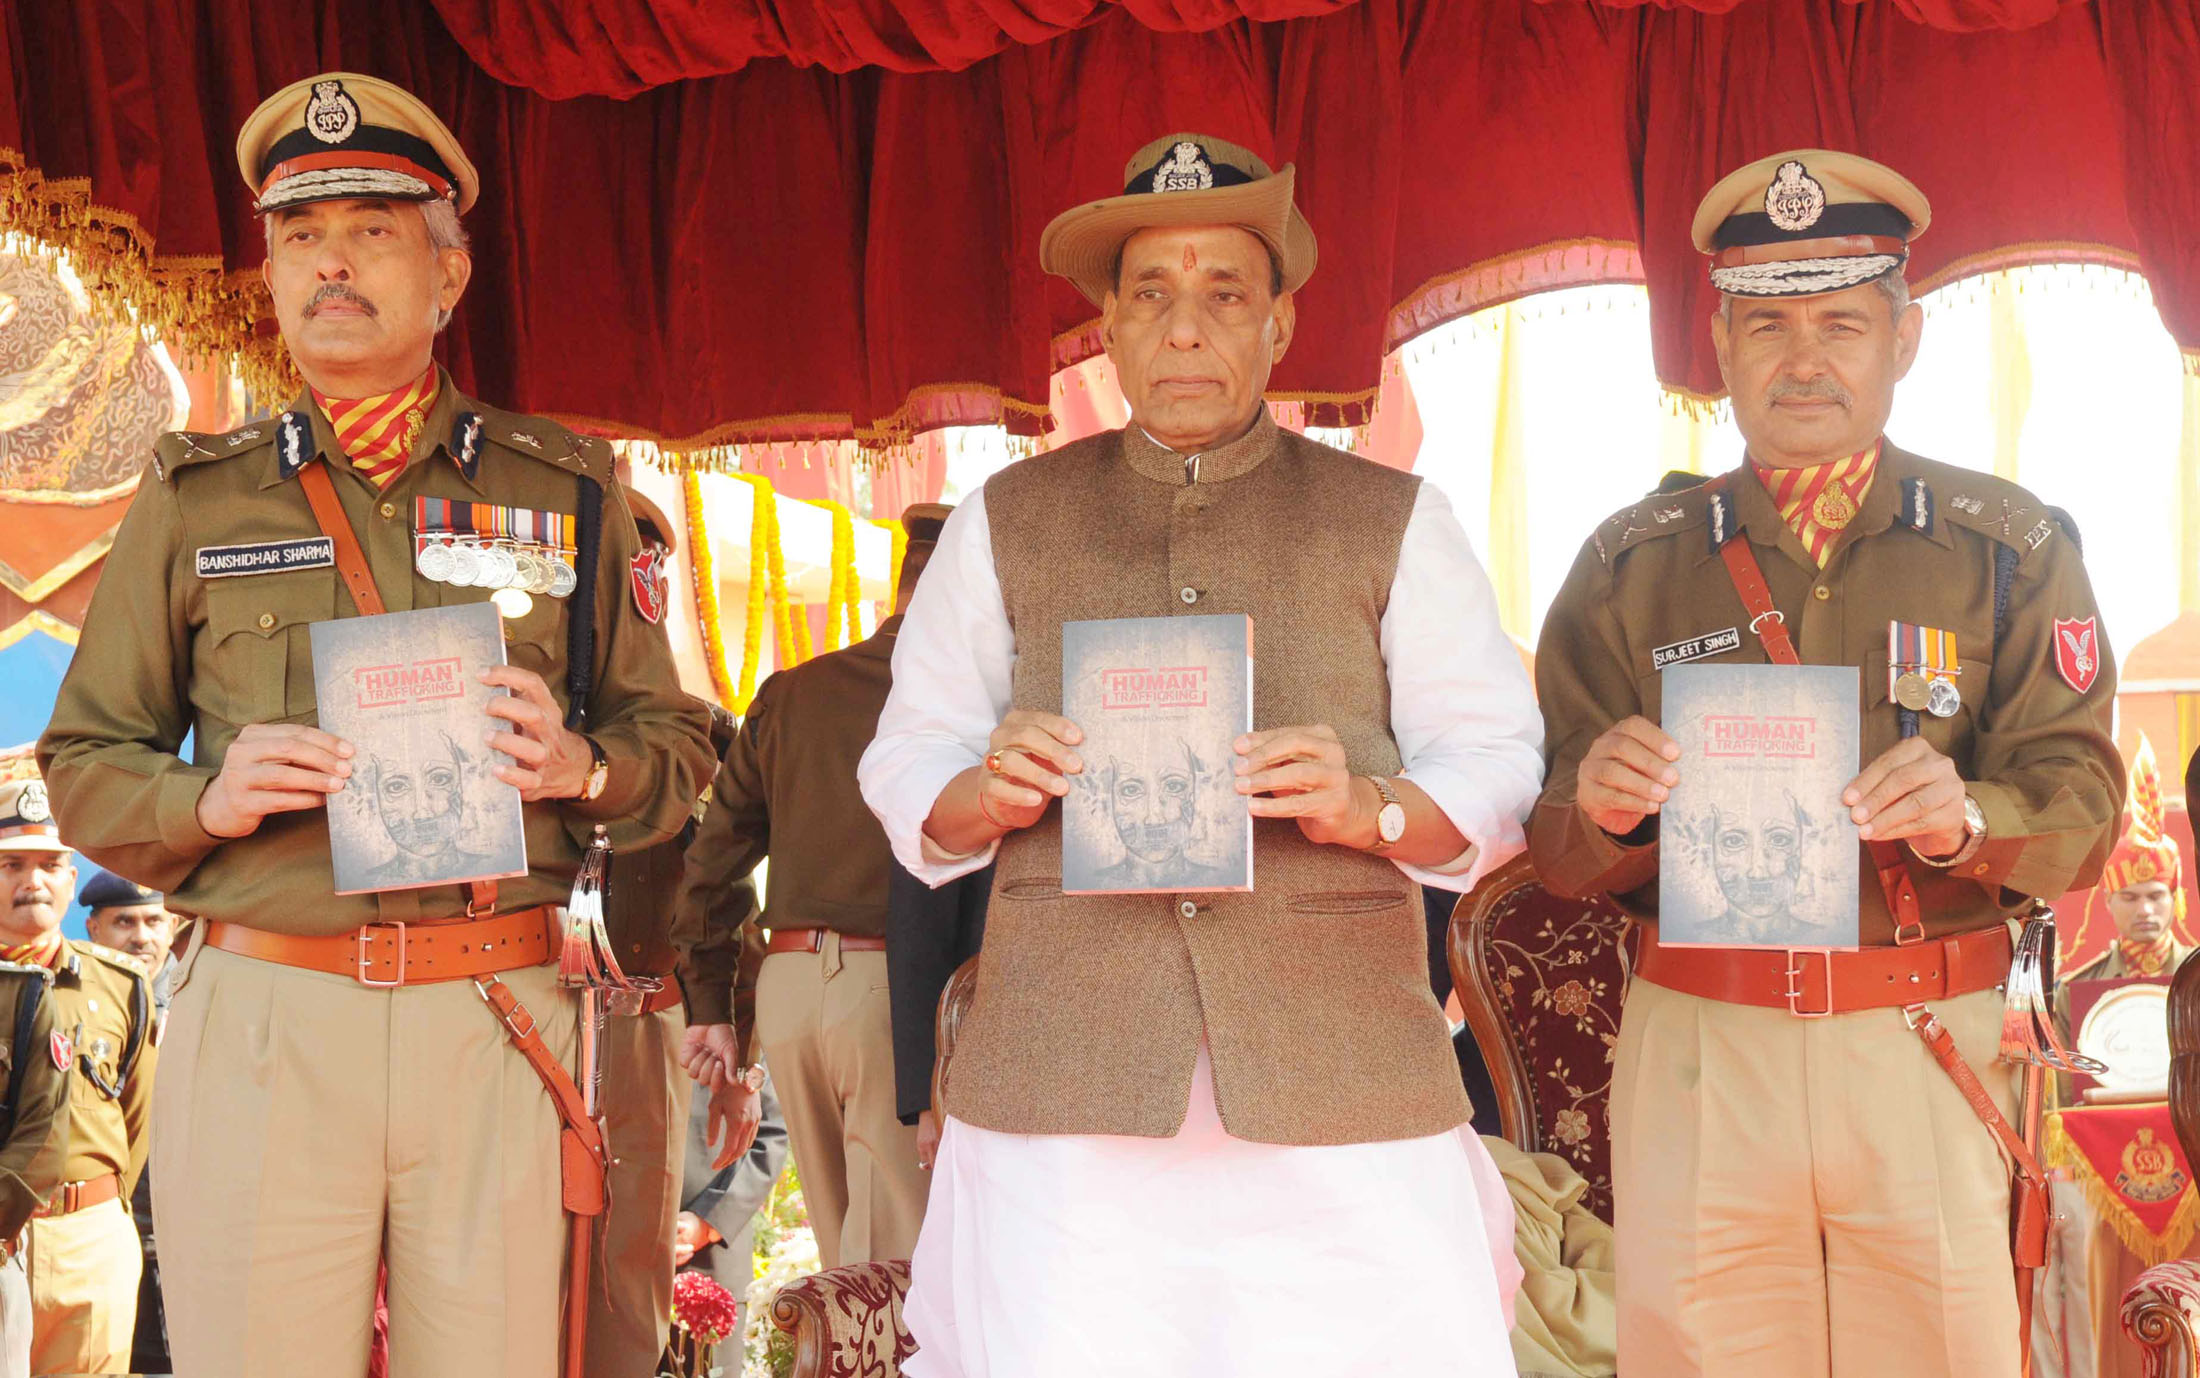 The Union Home Minister, Shri Rajnath Singh releasing a book titled Human Trafficking at the 52nd anniversary parade of Sashastra Seema Bal, in New Delhi on December 24, 2015.